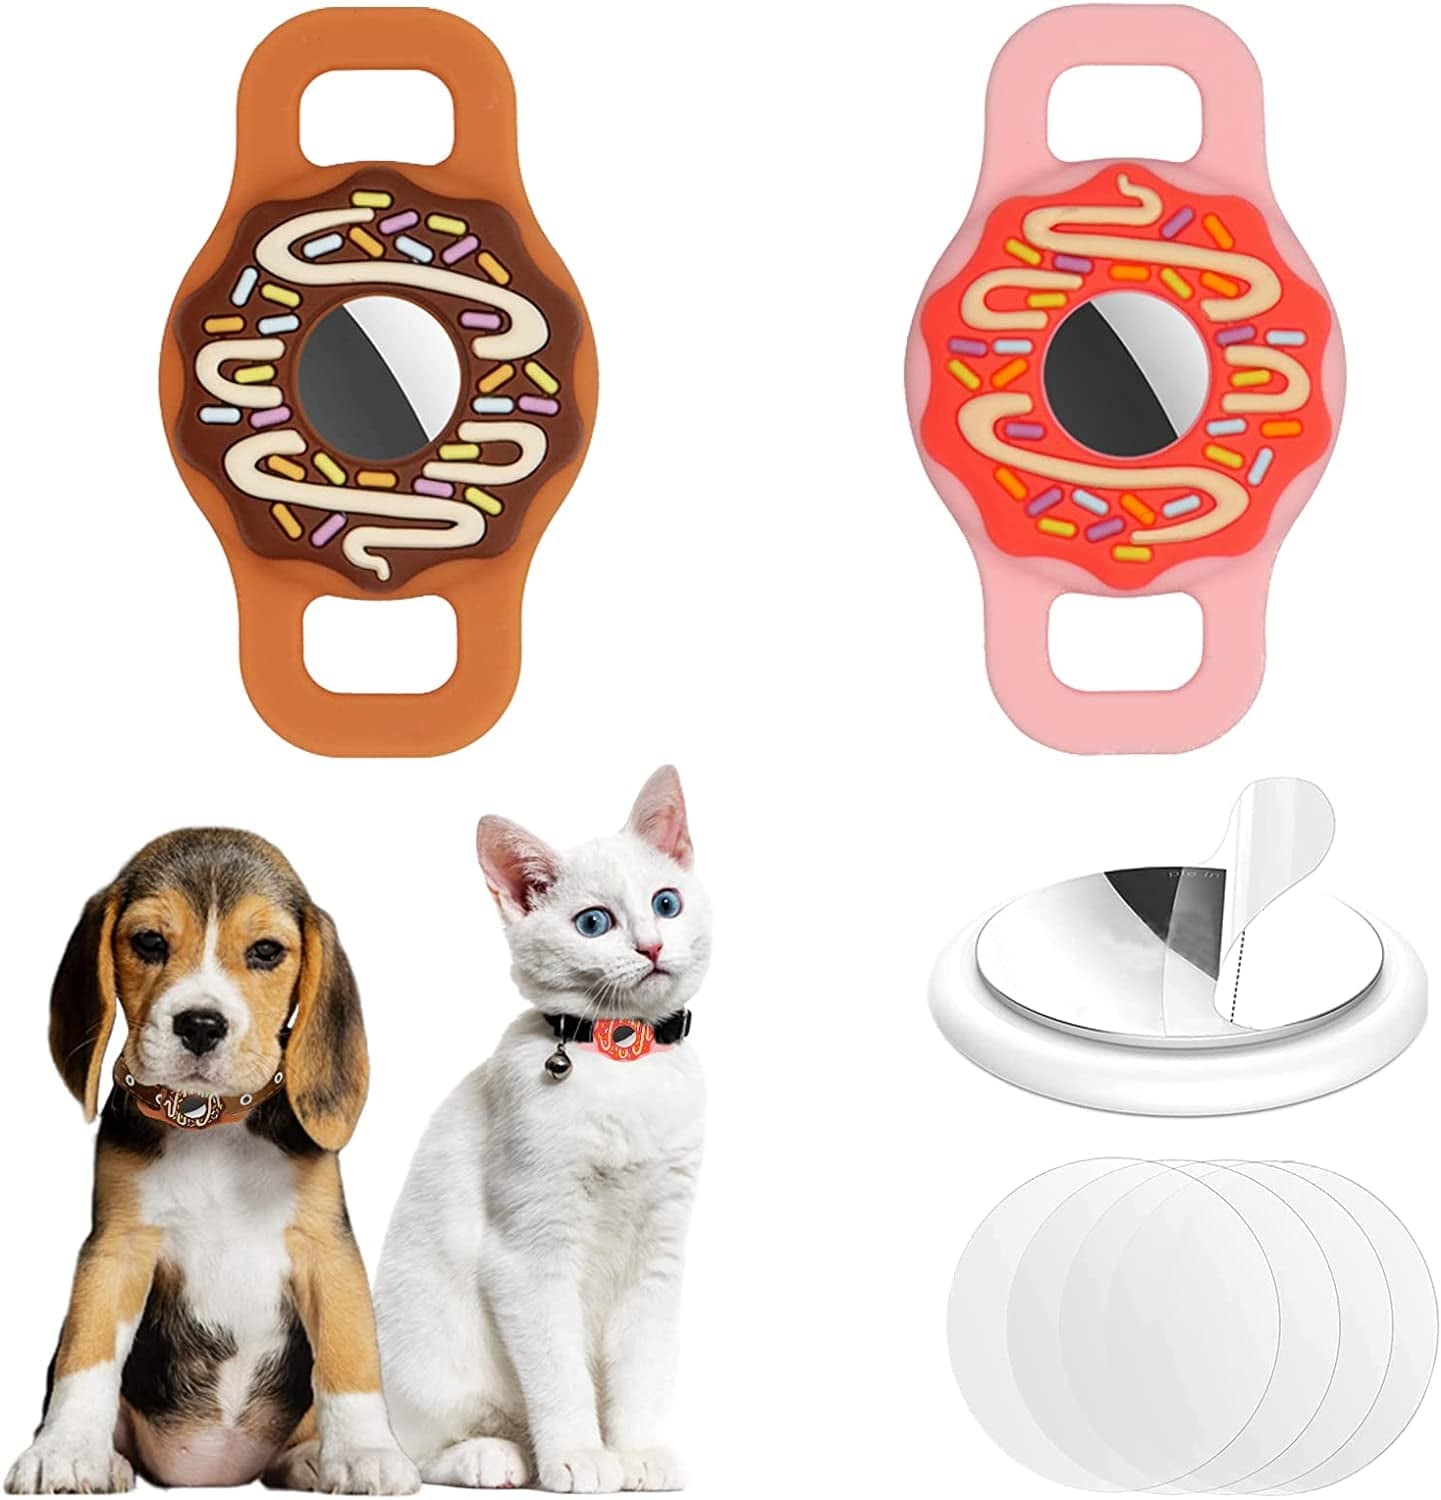 3-Pack Airtag Cat Collar Holder for Apple Airtag 2021, Silicone Airtag Protective Case for Puppy Collar, Anti-Lost Airtag Dog Collar Holder with Screen Protectors Electronics > GPS Accessories > GPS Cases Fretime Donut - Pink & Brown Suitable for collar up to 0.7 inch wide 